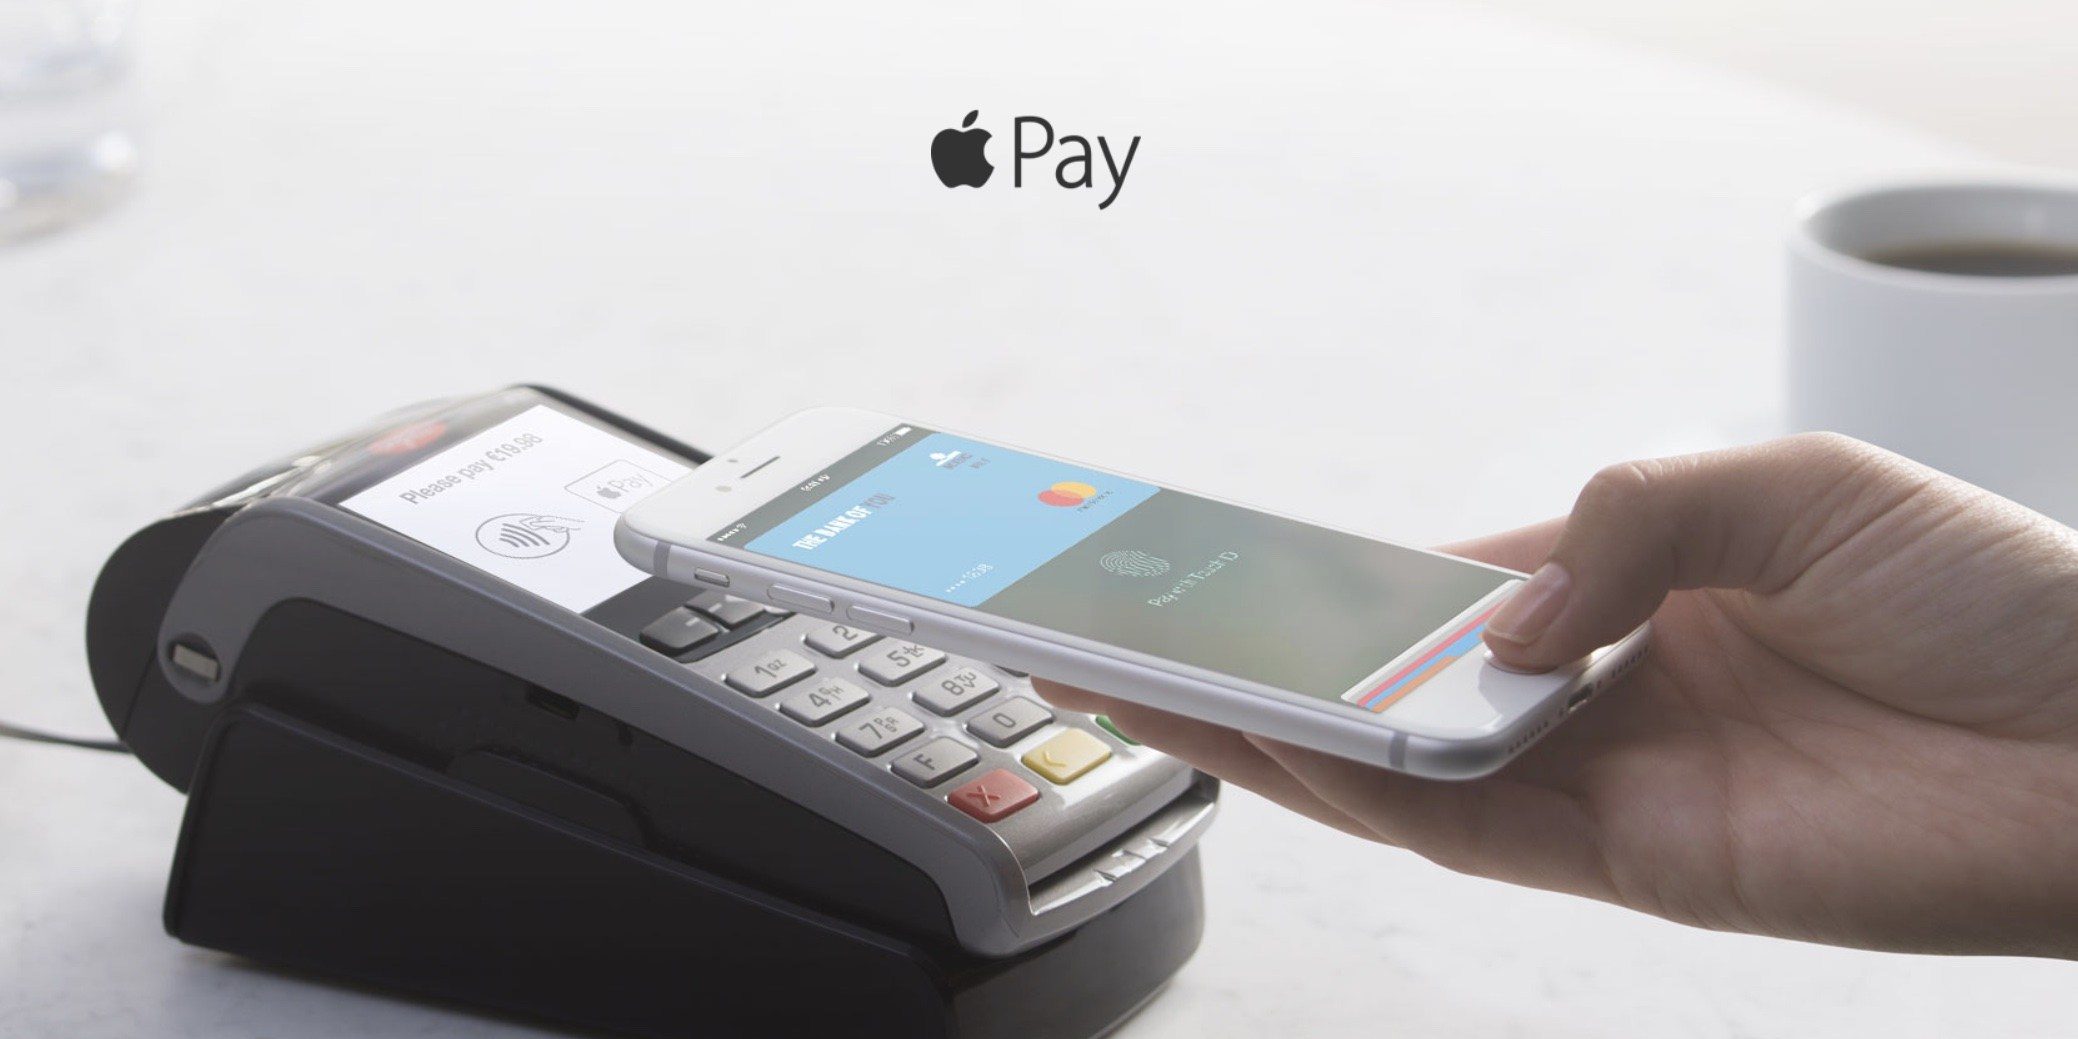 How to set up Apple Pay, connect, enable, install 